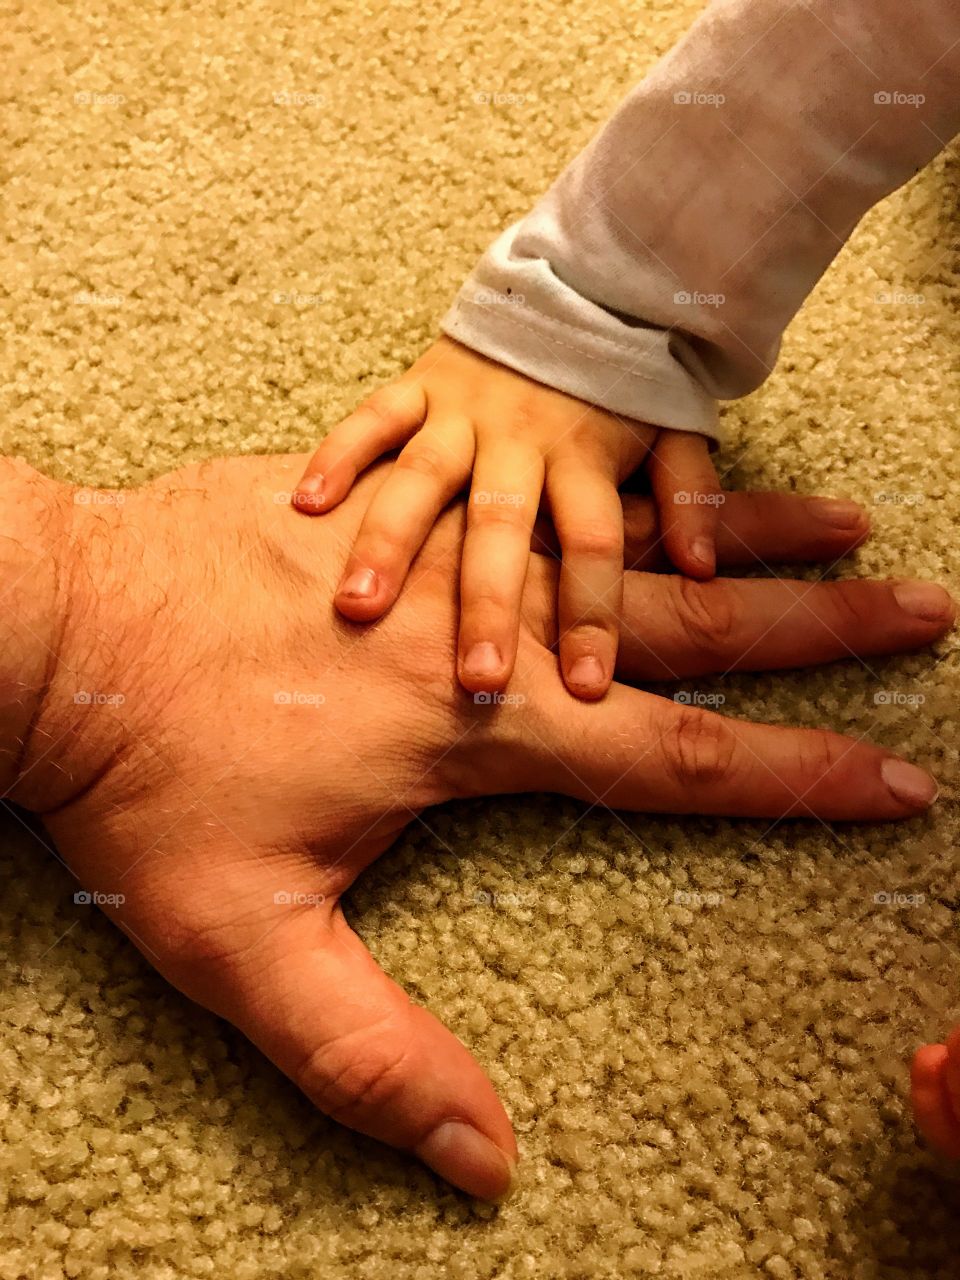 Daddy daughter hands